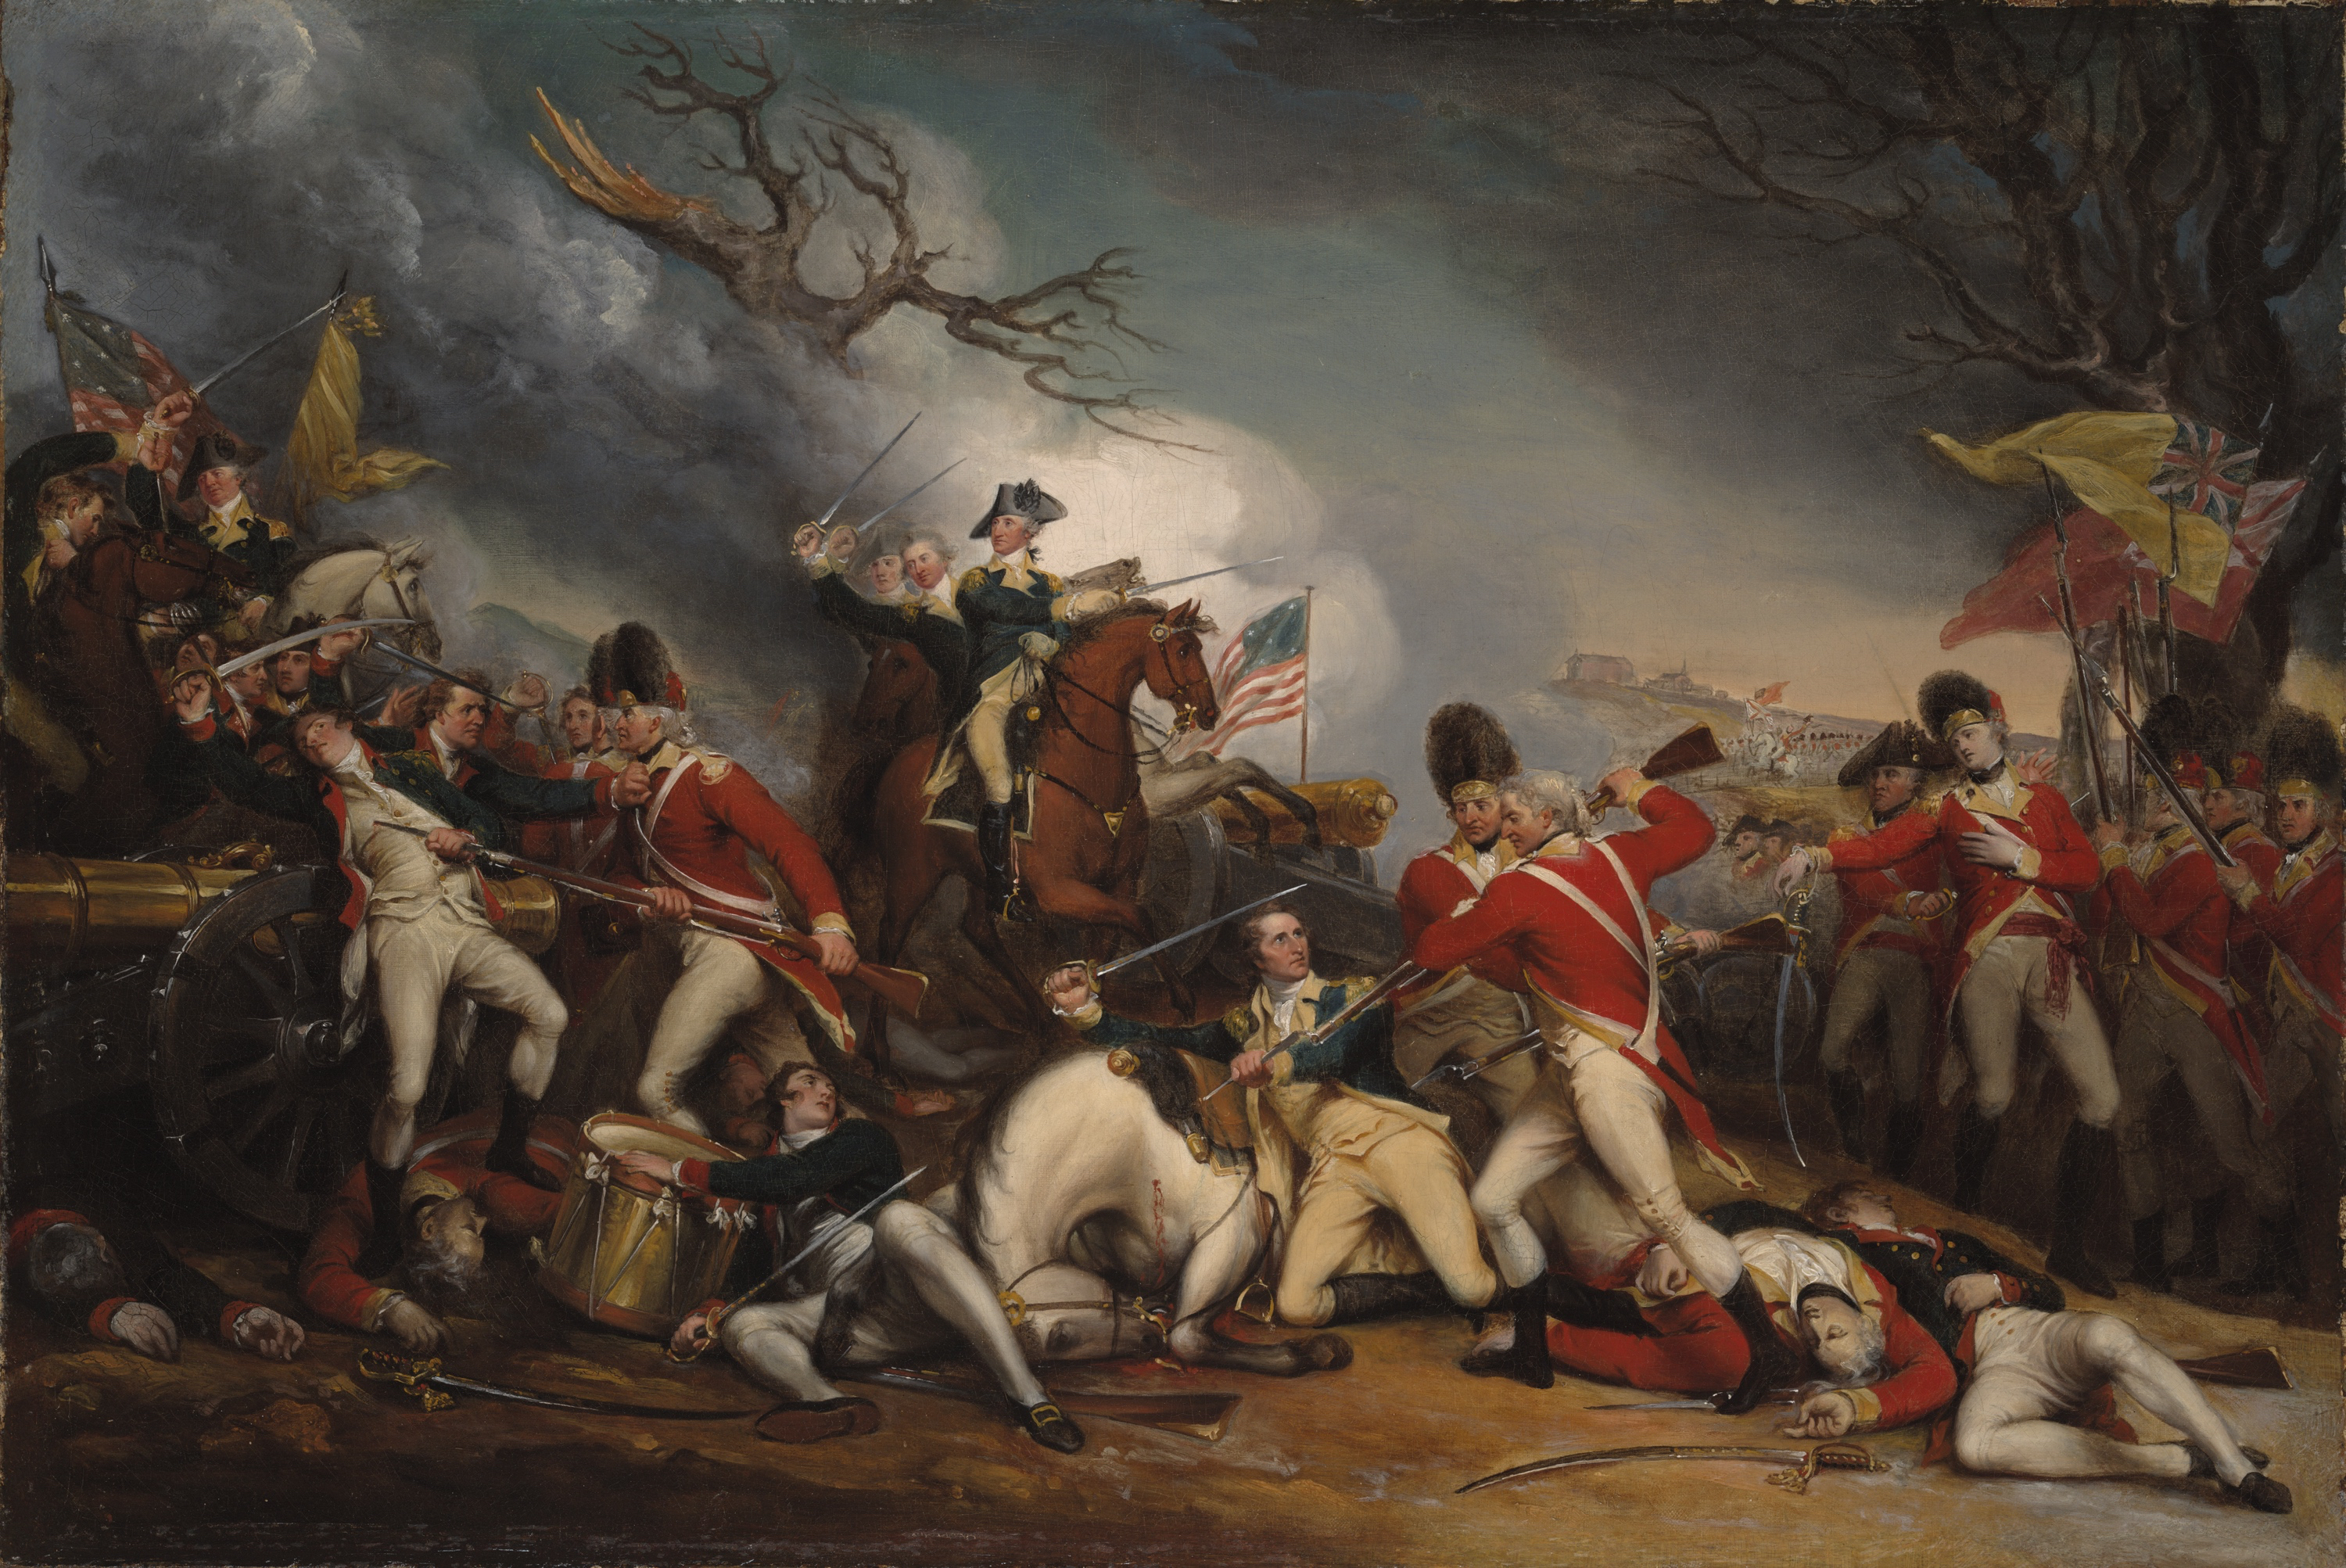 4 The Death of General Mercer at the Battle of Princeton, January 3, 1777 by John Trumbull